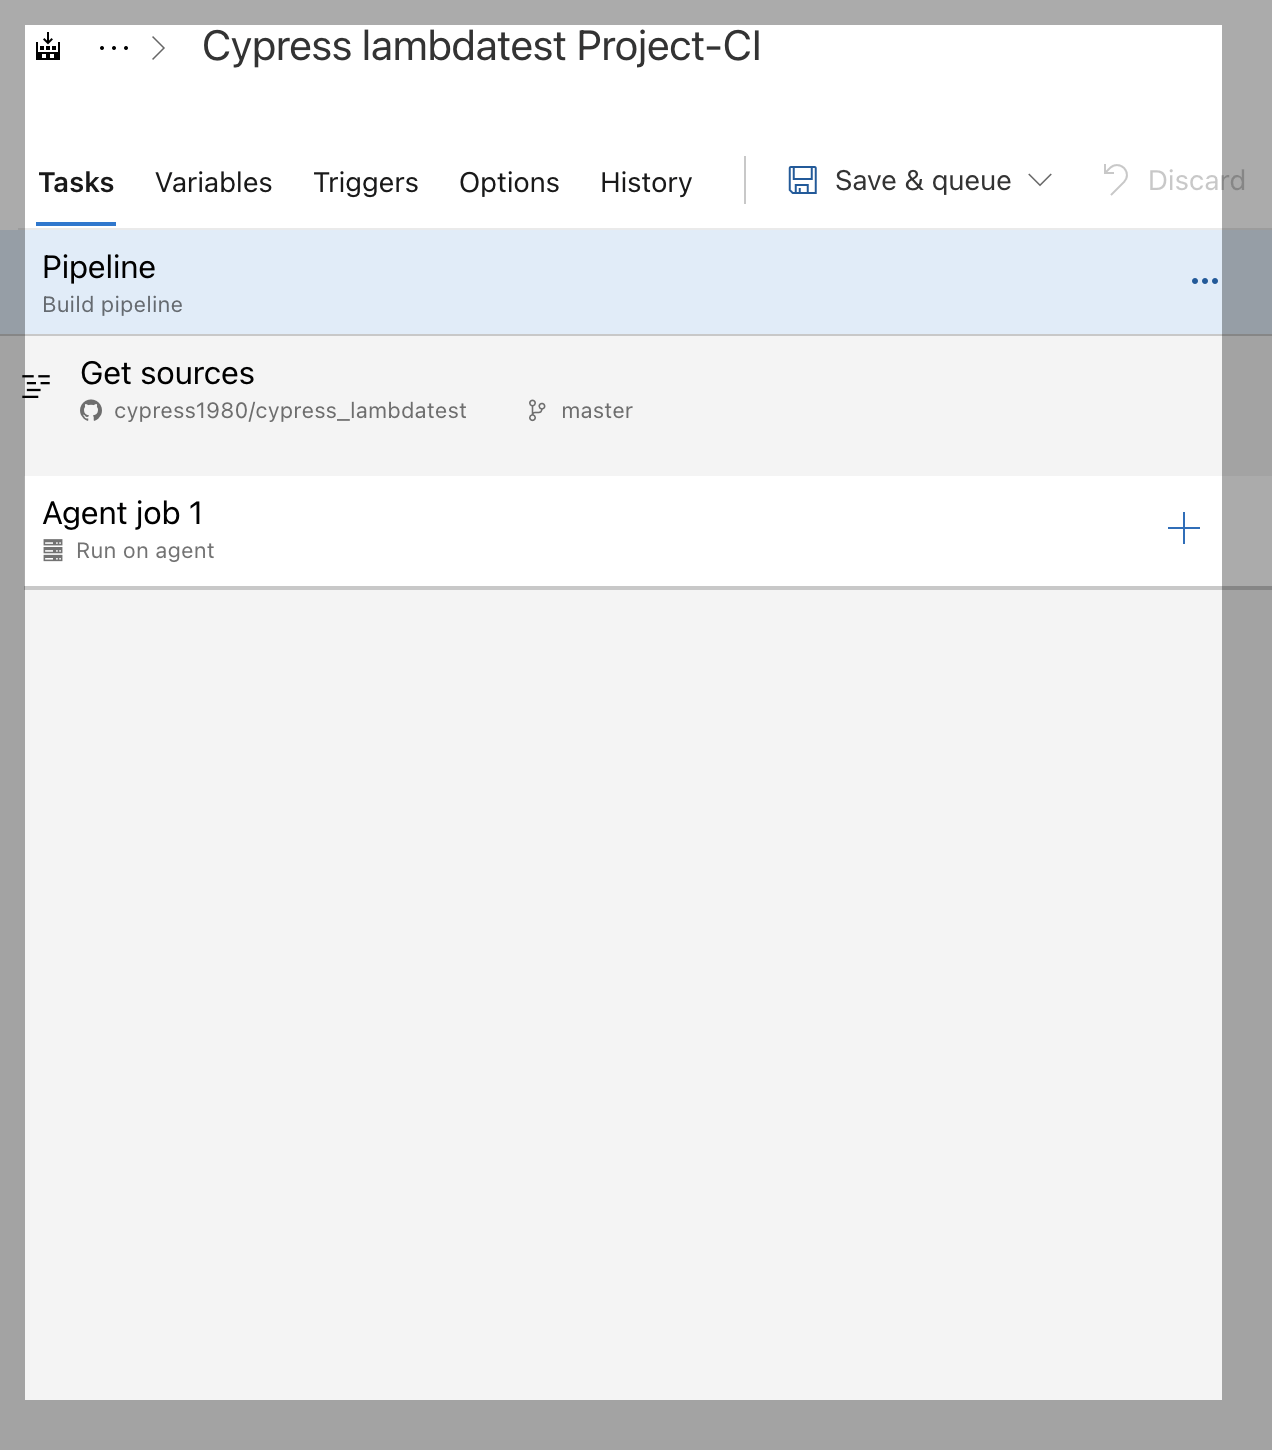 After clicking on “Empty job” on the next screen, we can see under the Tasks tab three options: Pipeline, Get Source, and Agent job. By default, the pipeline is selected.